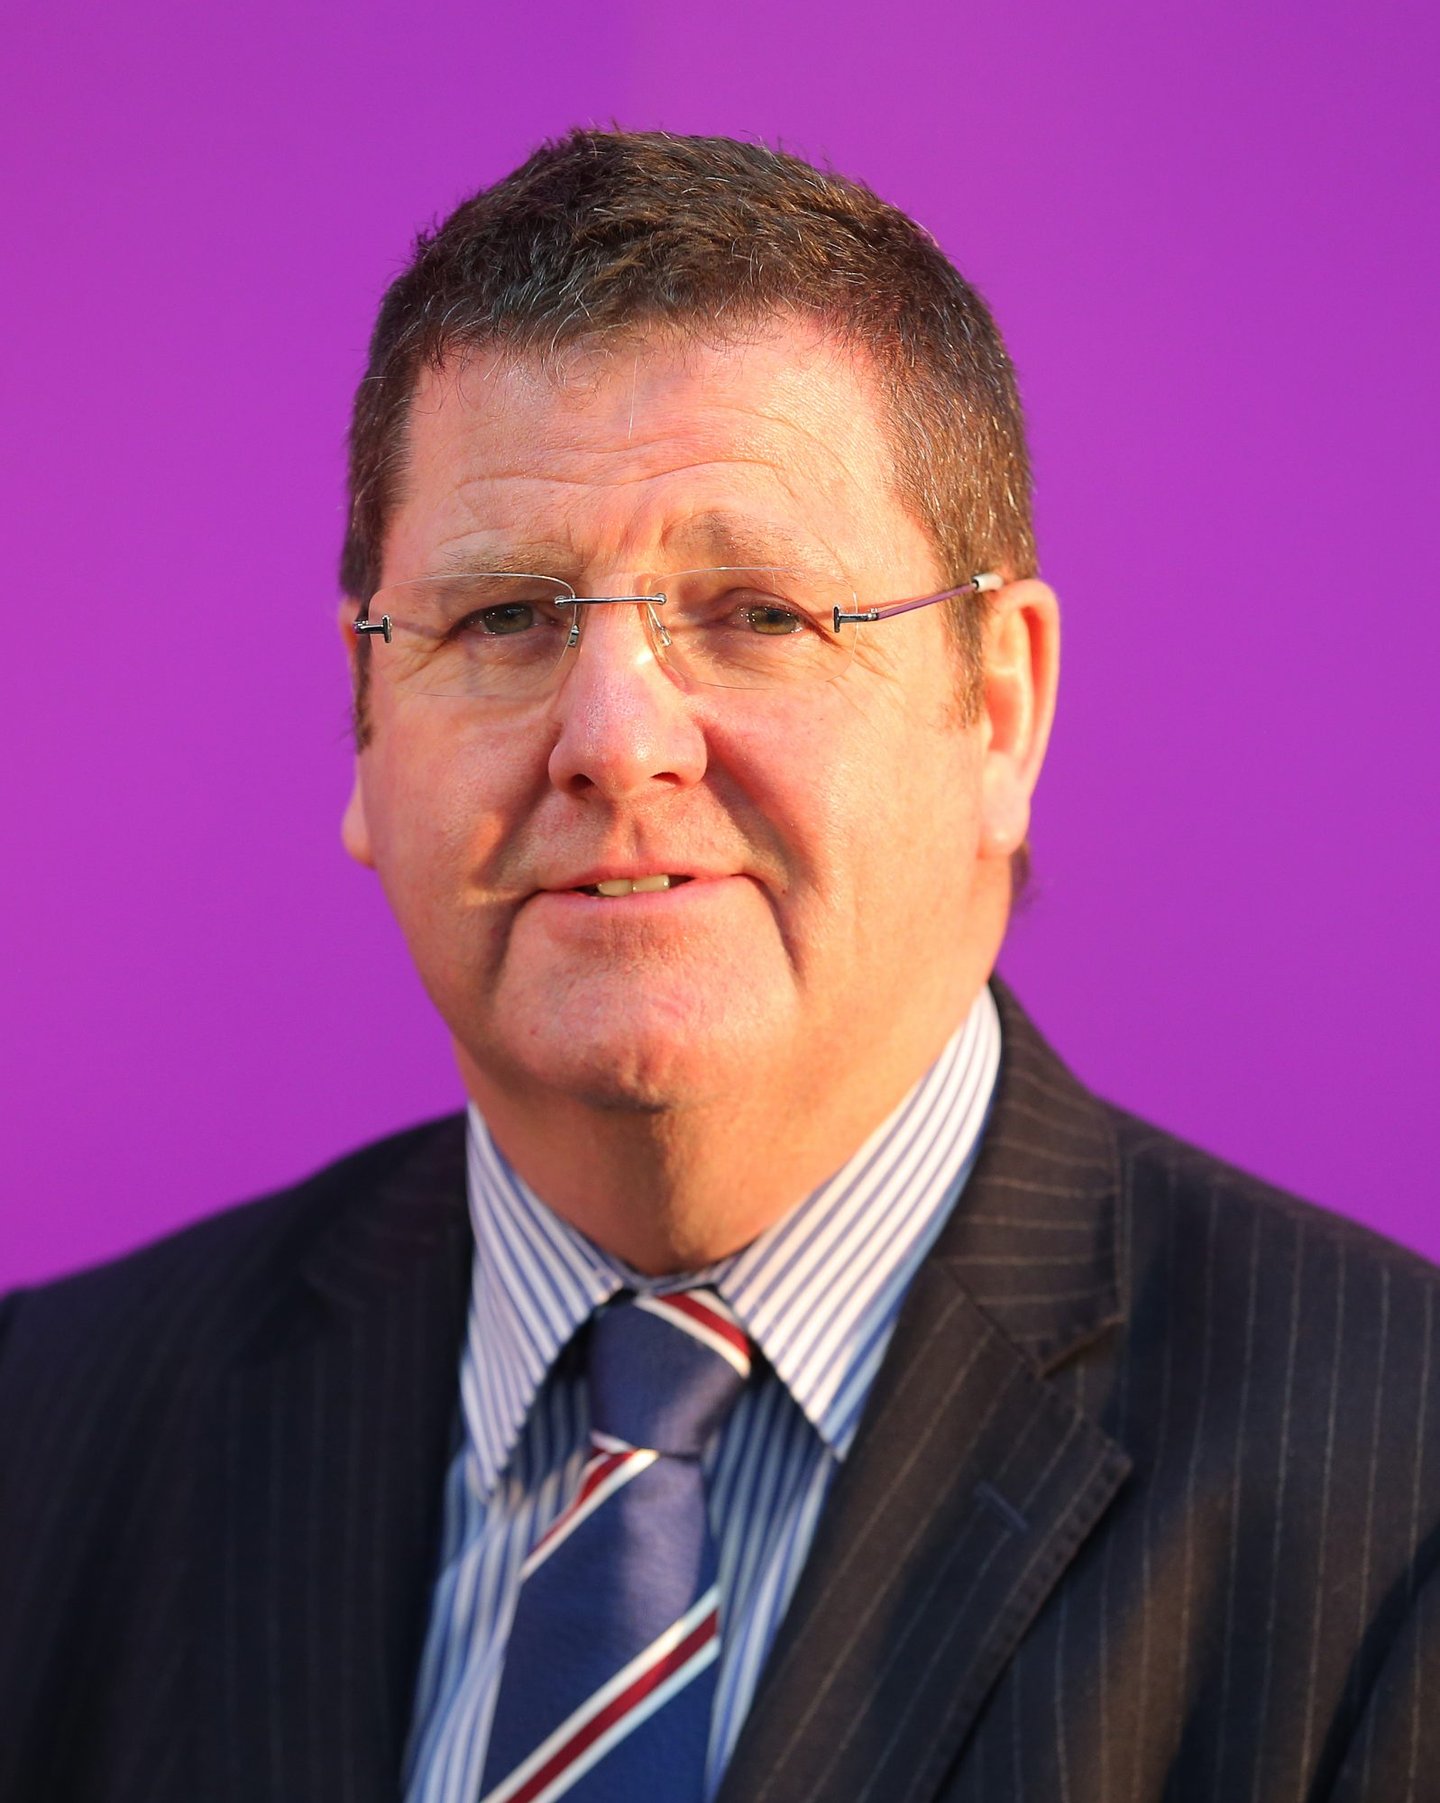 HEYWOOD, ENGLAND - MARCH 23: UKIP MEP Mike Hookem during a visit to Concept Metal Products & Co Ltd on March 23, 2015, Heywood in Manchester, England. (Photo by Dave Thompson/Getty Images)